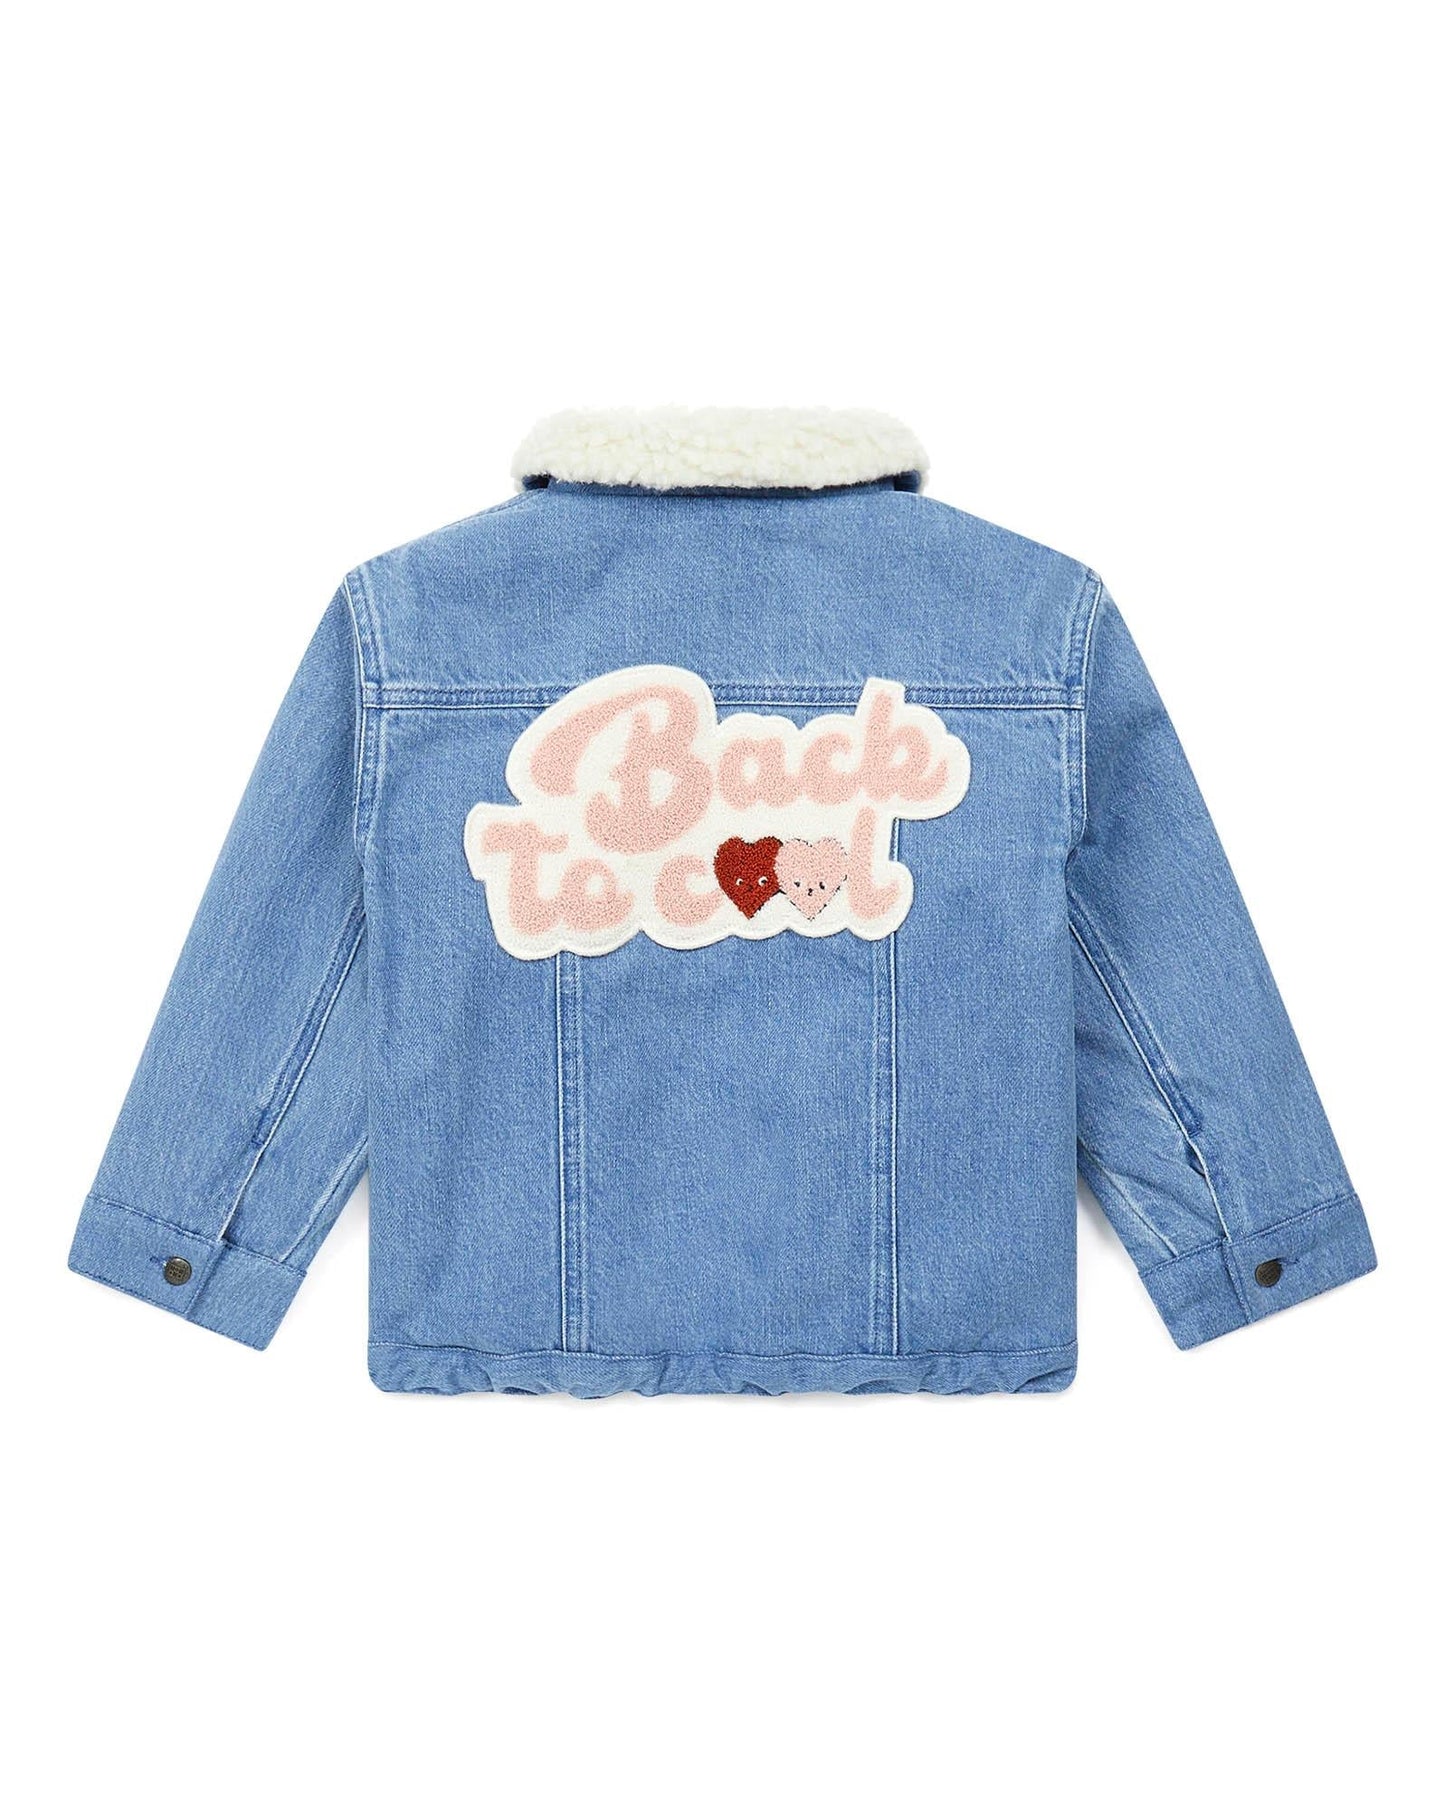 Jacket - Girl 100% cotton jeans